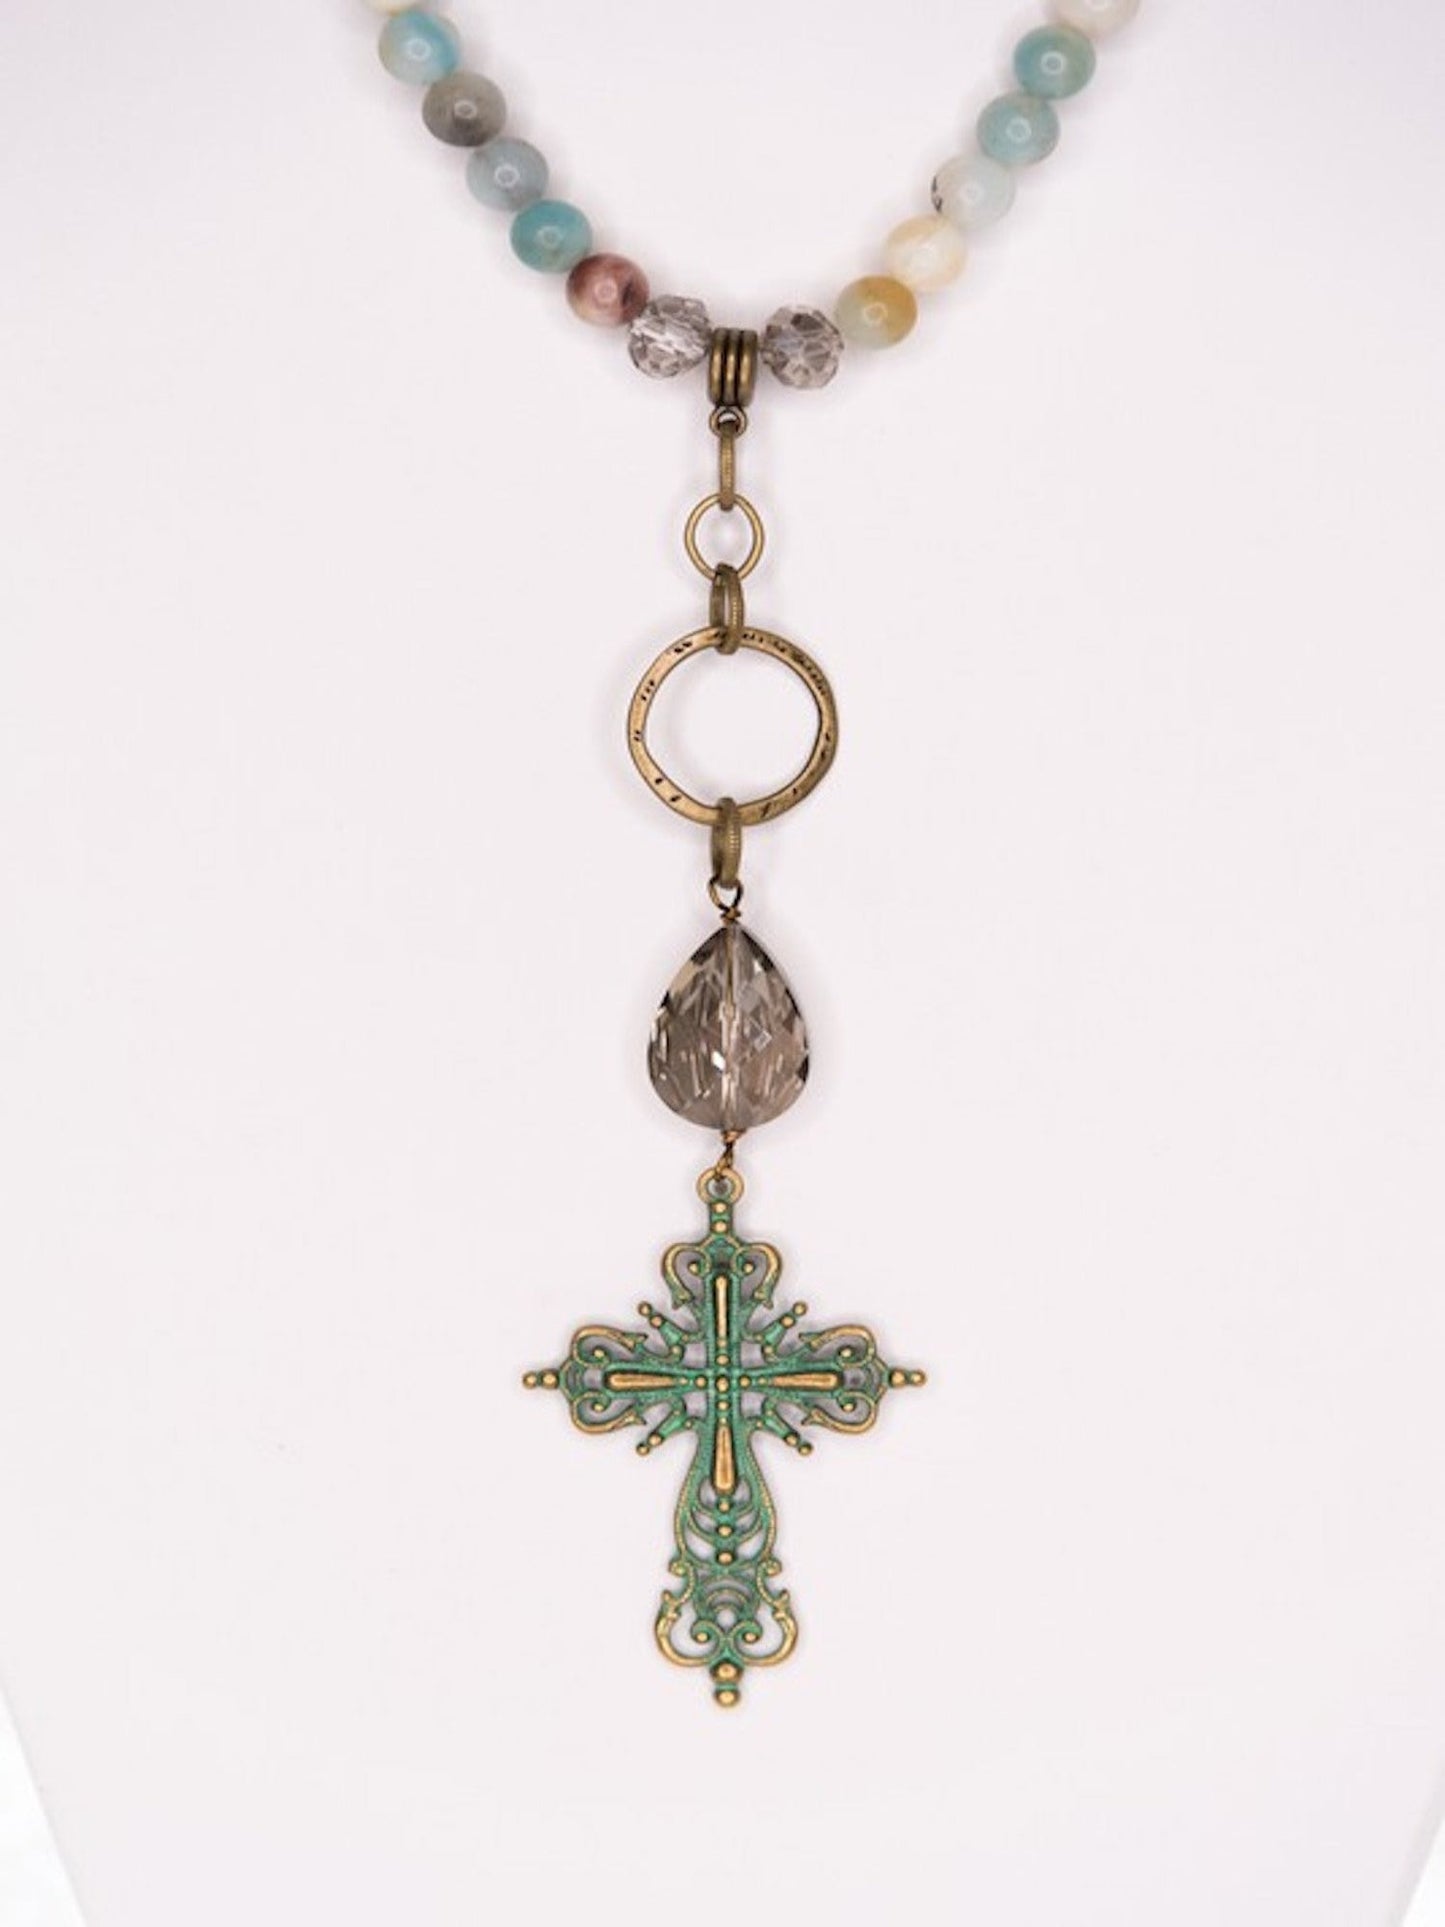 The Hope Necklace